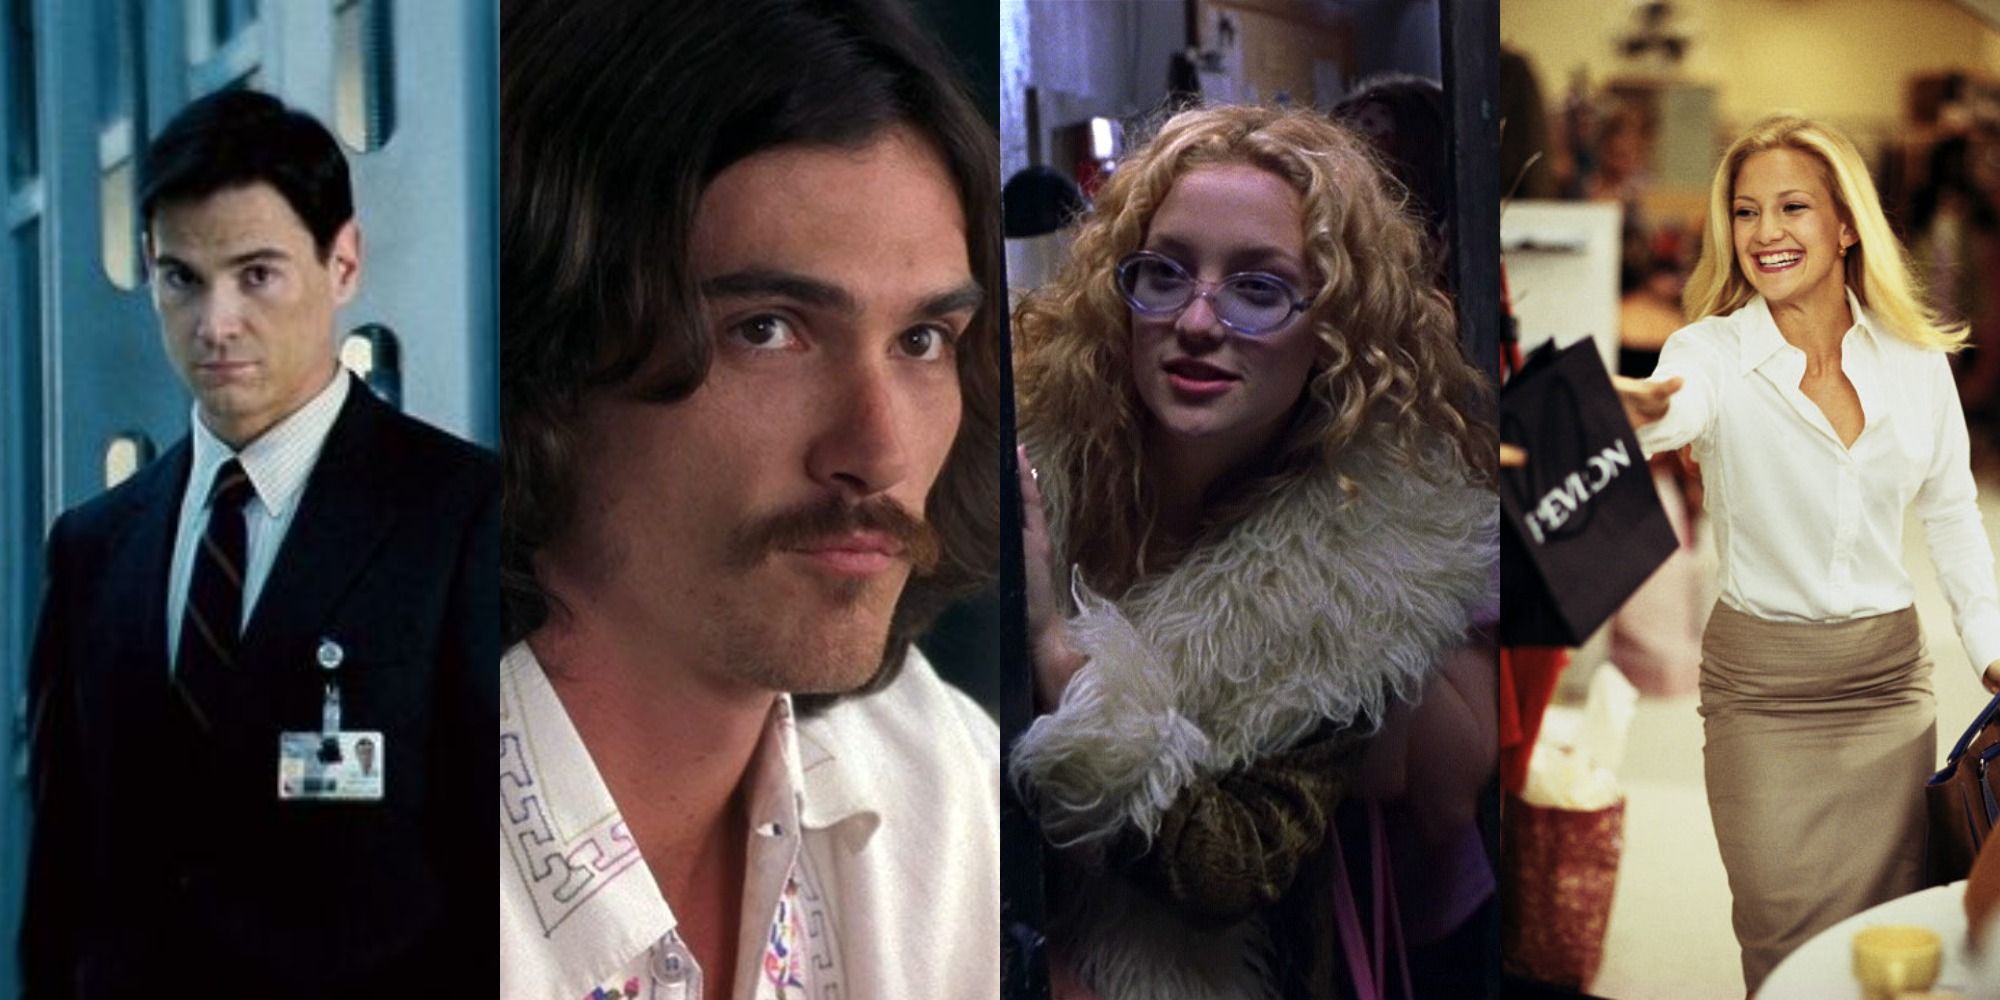 The Cast Of Almost Famous: Where Are They Now?